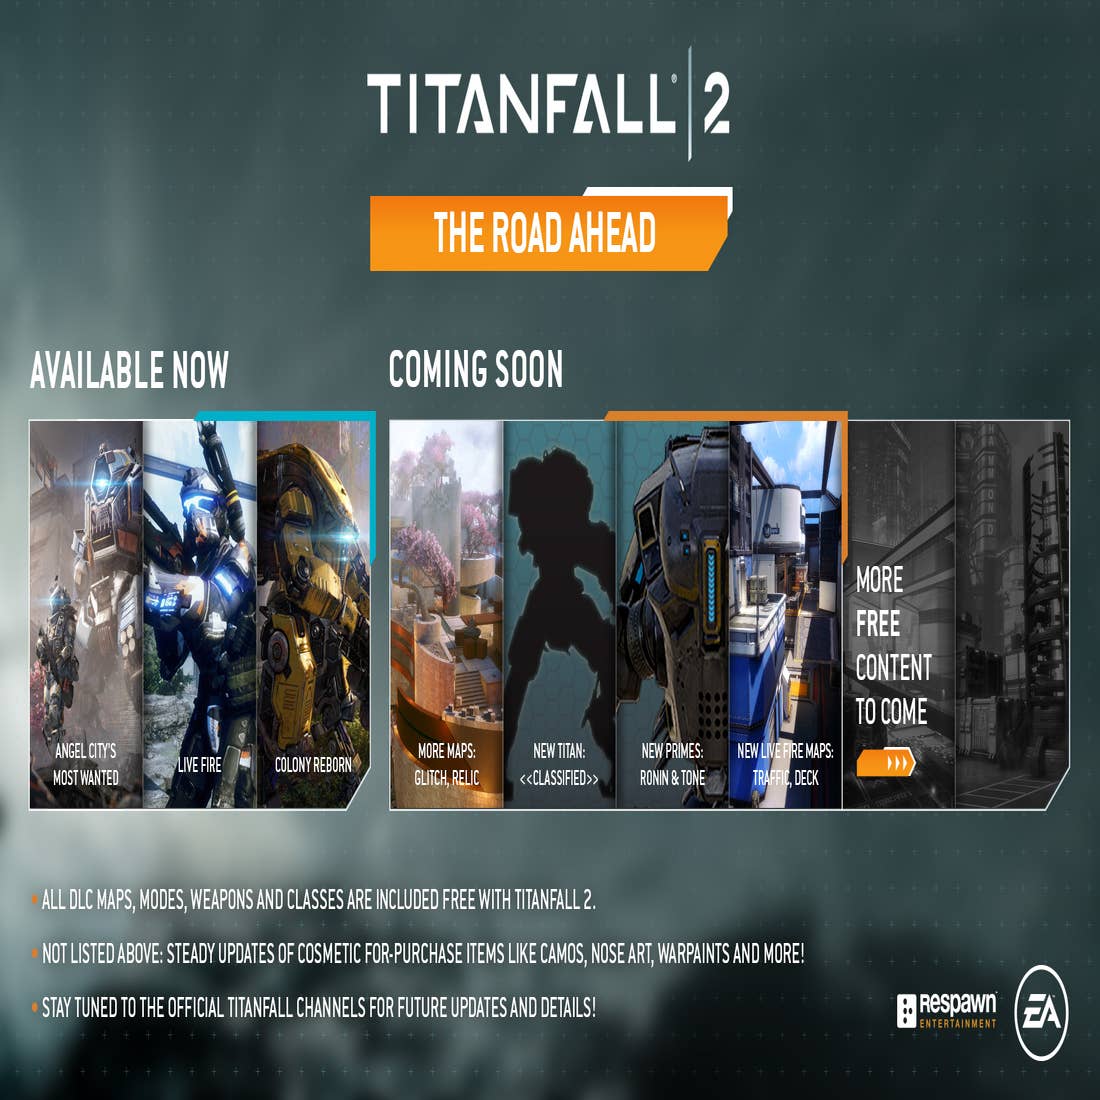 Titanfall 2 Custom Servers Are Finally Here, Available to Play on PC